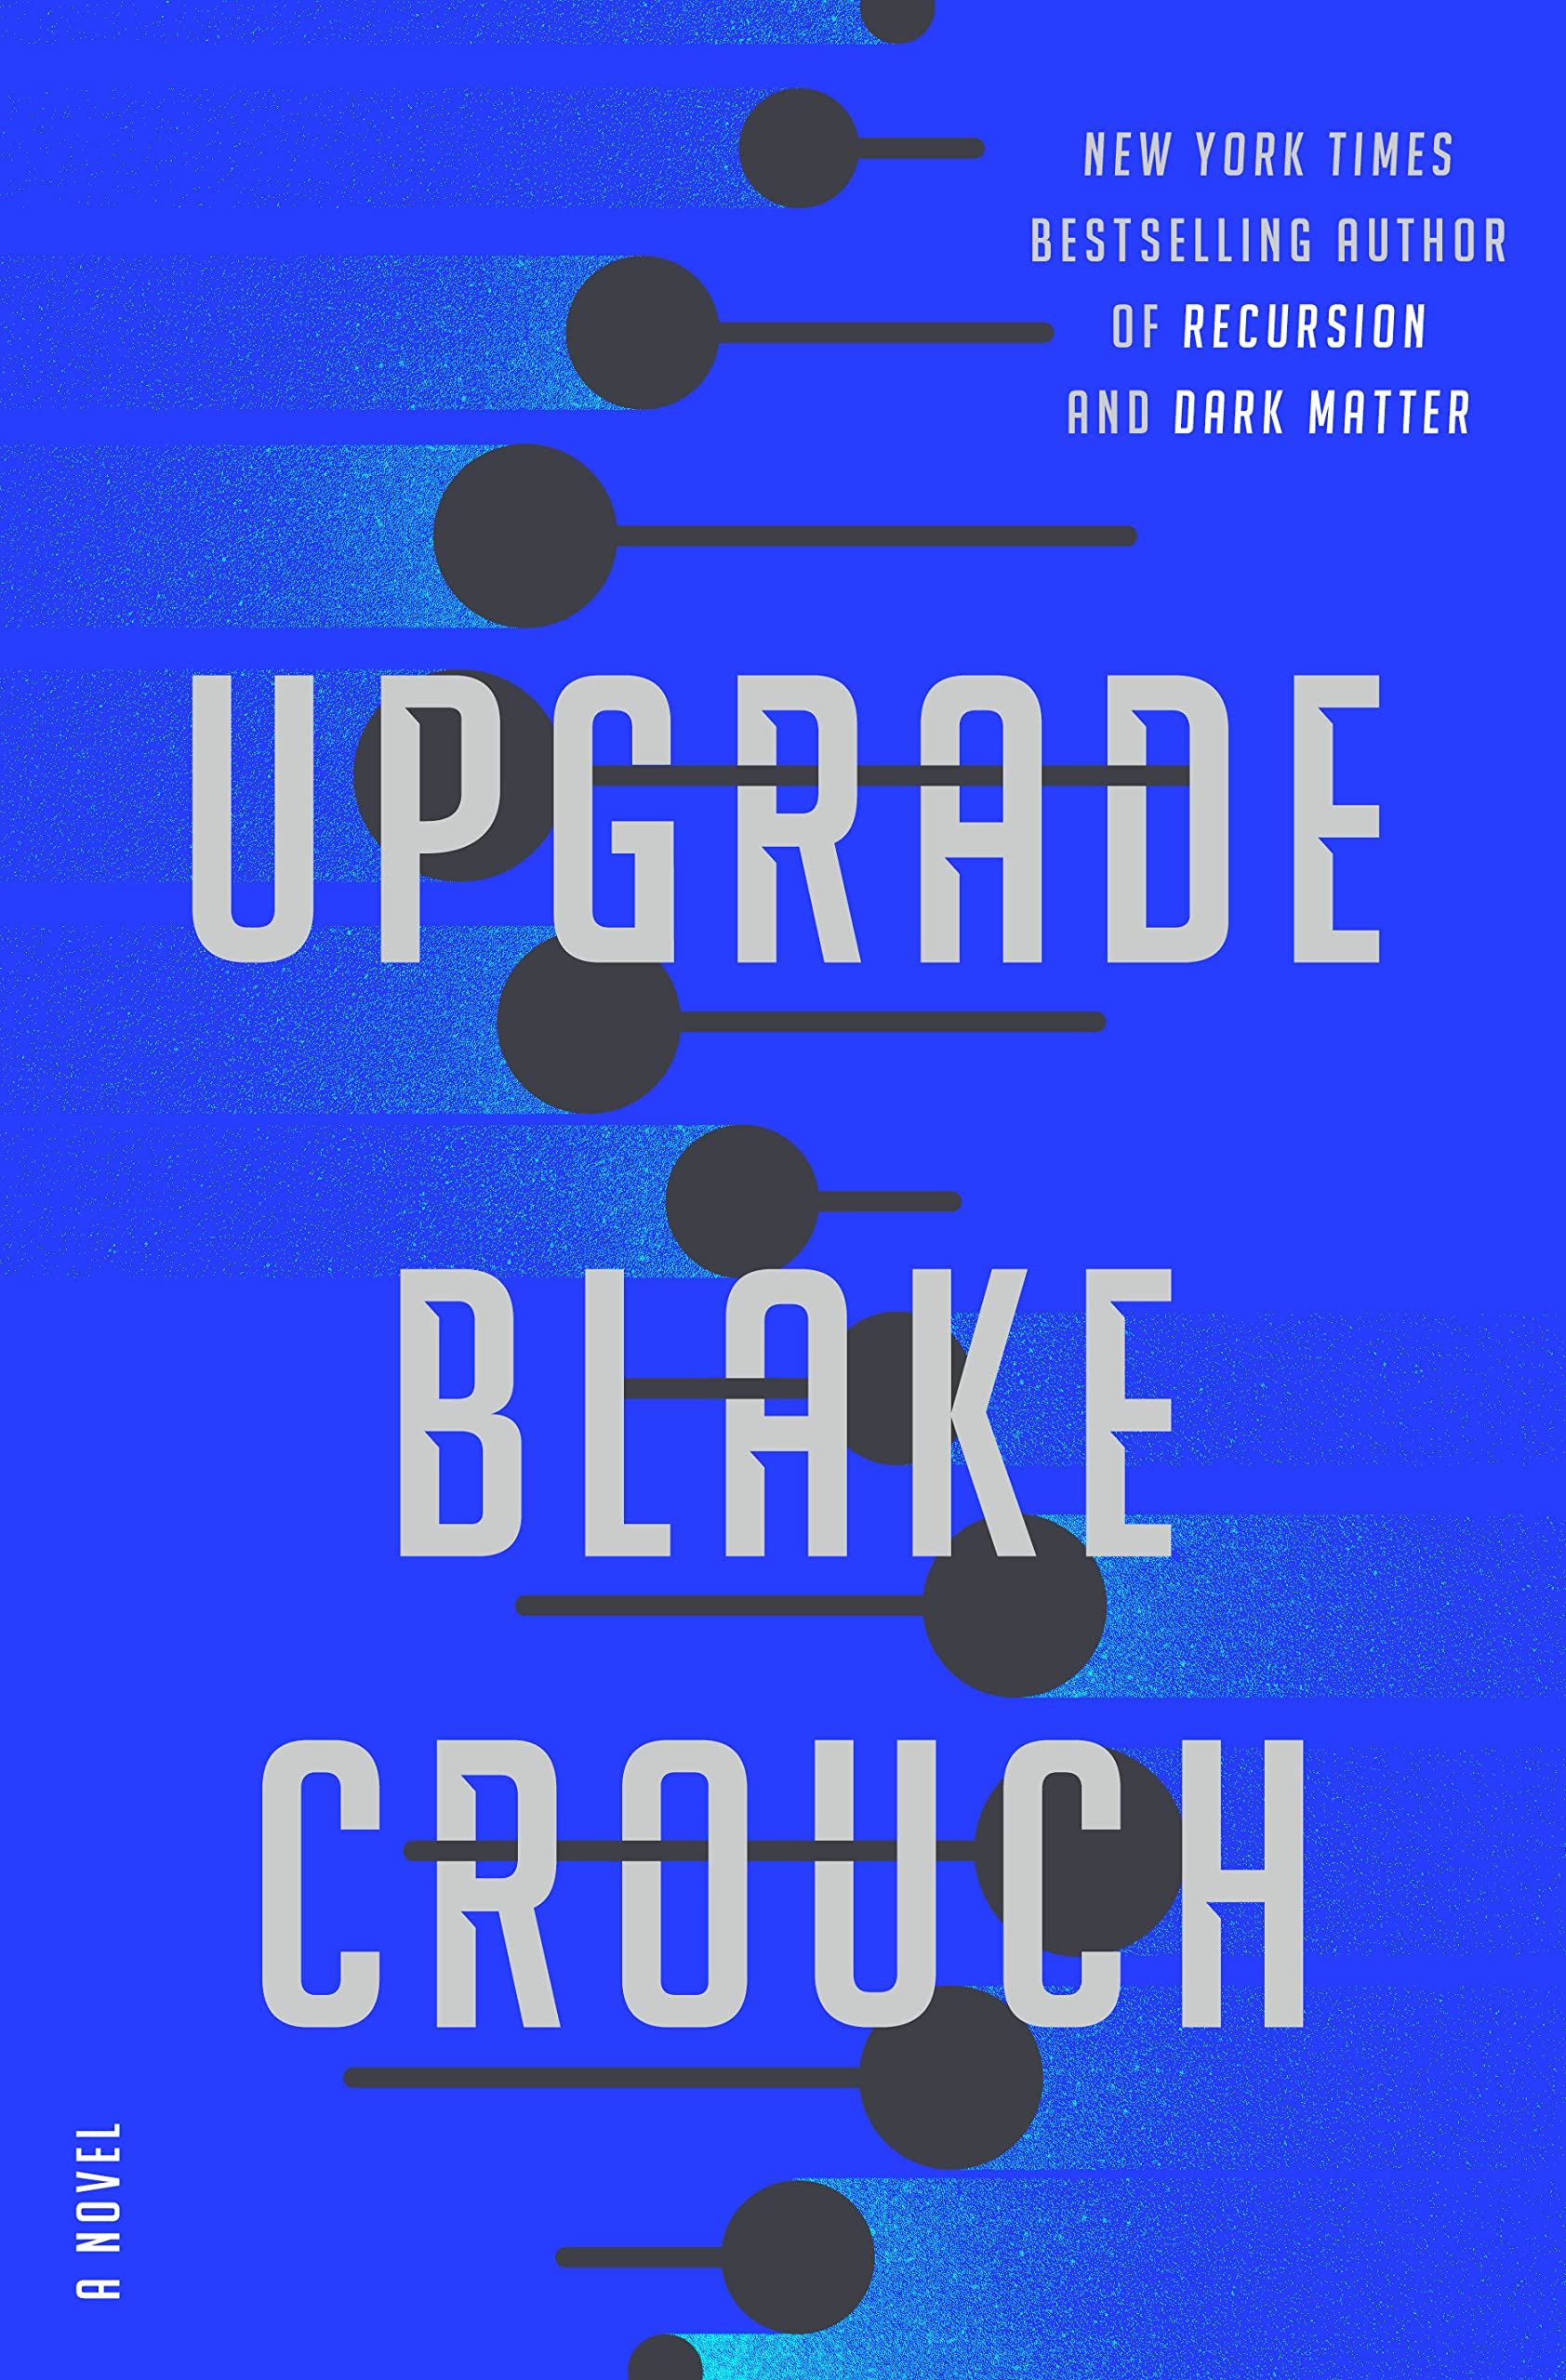 Blake Crouch Book Cover Upgrade